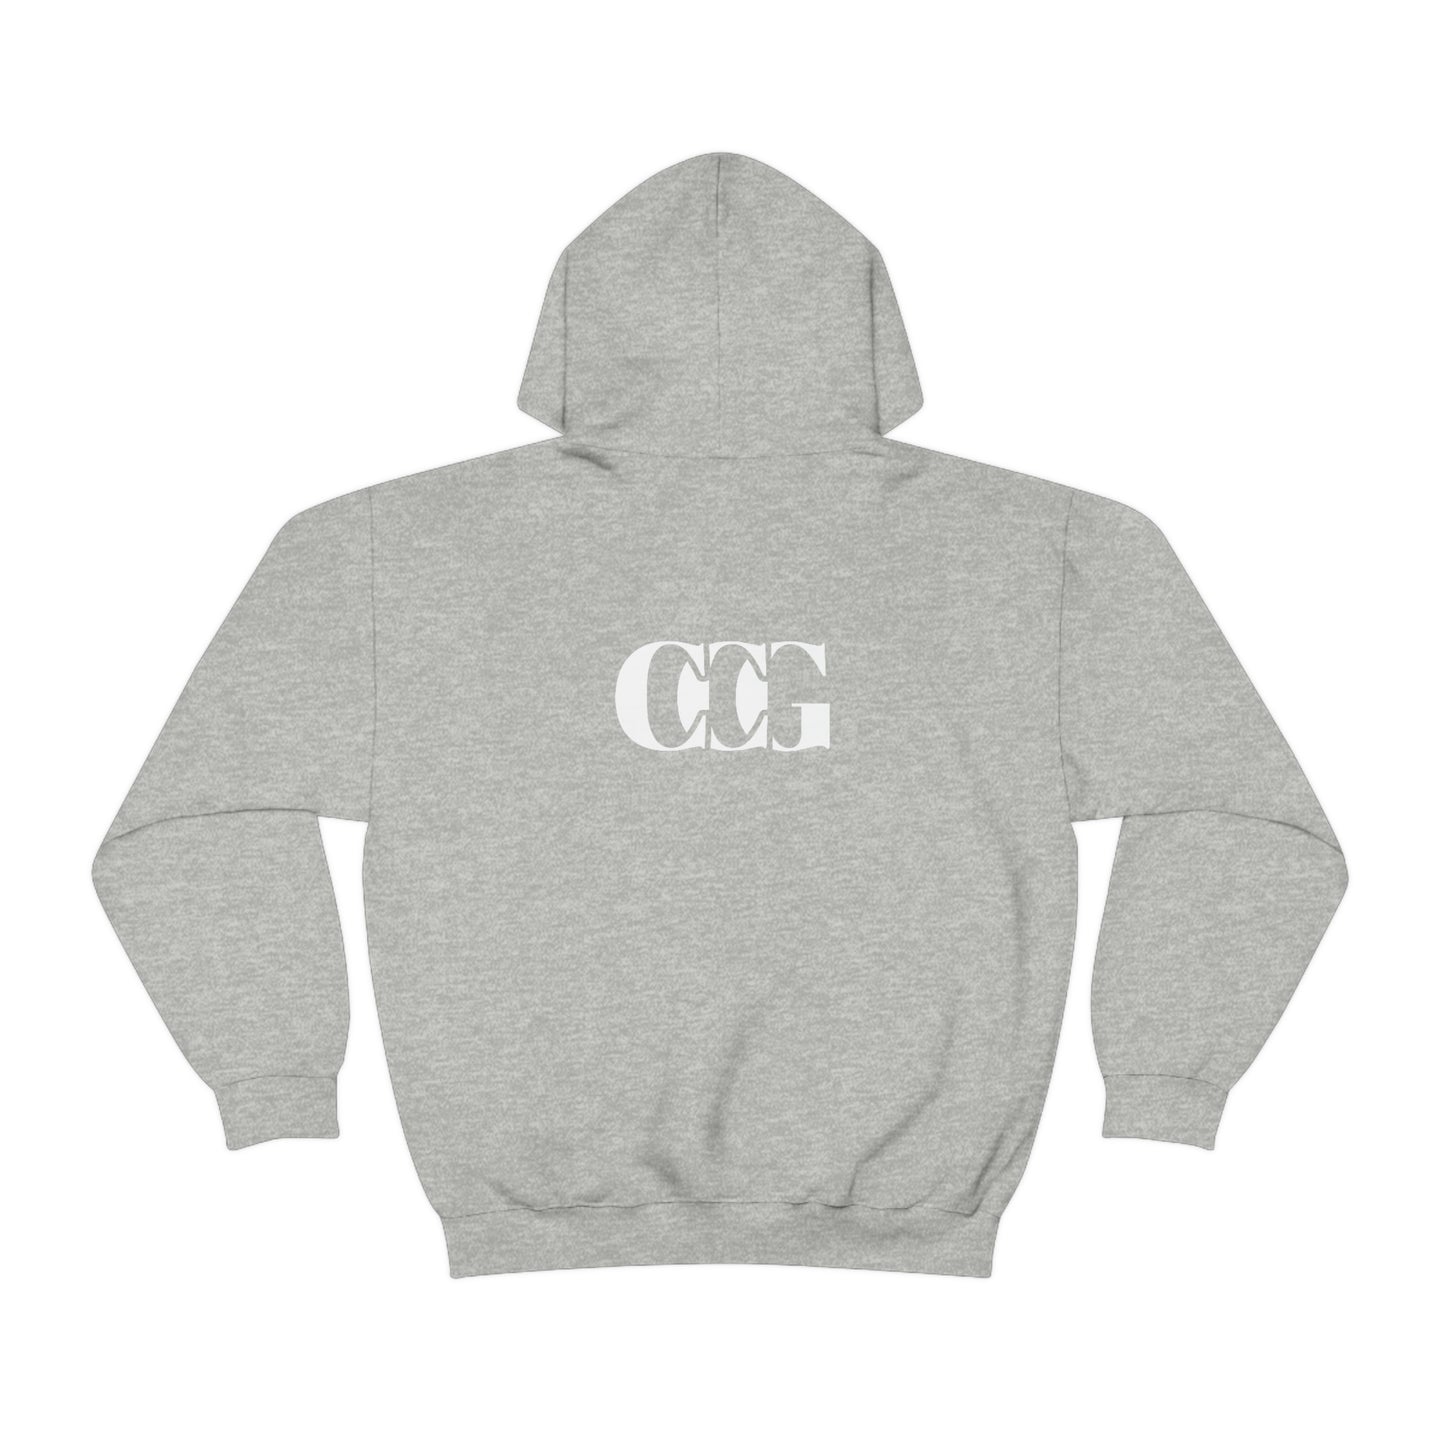 CCG Quan "CCG" Double Sided Hoodie